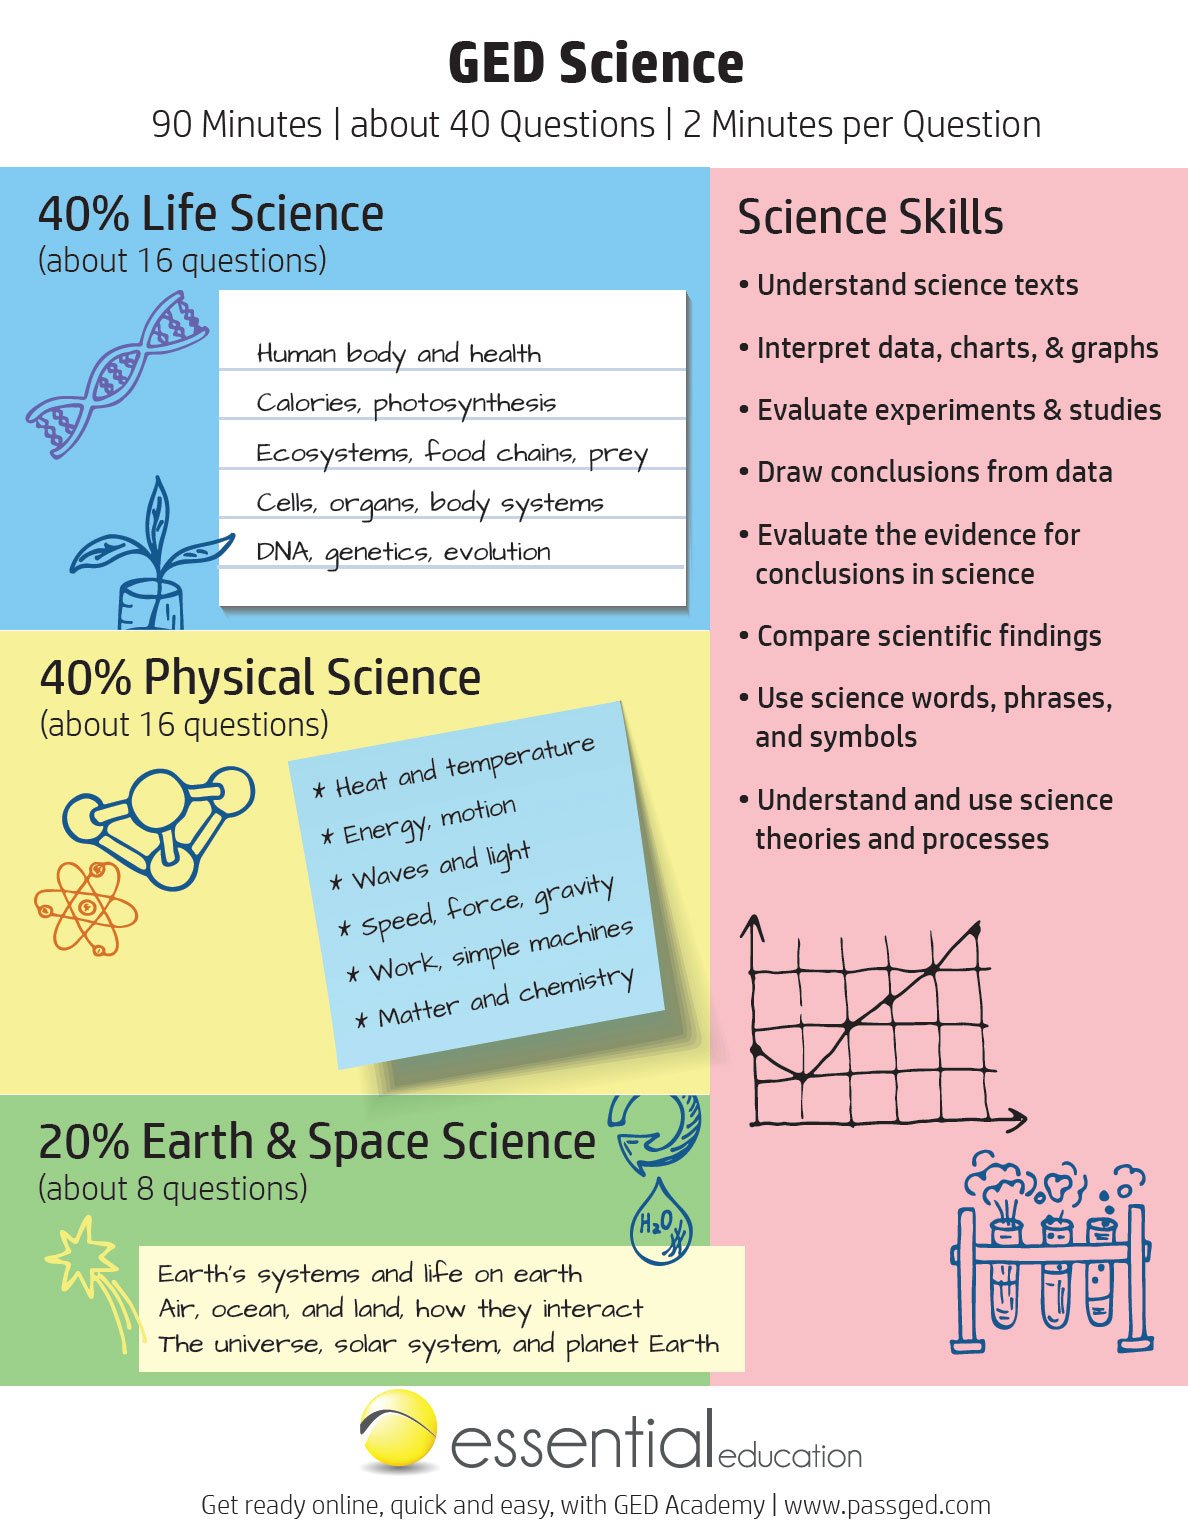 GED science cheat sheet to help you pass the test